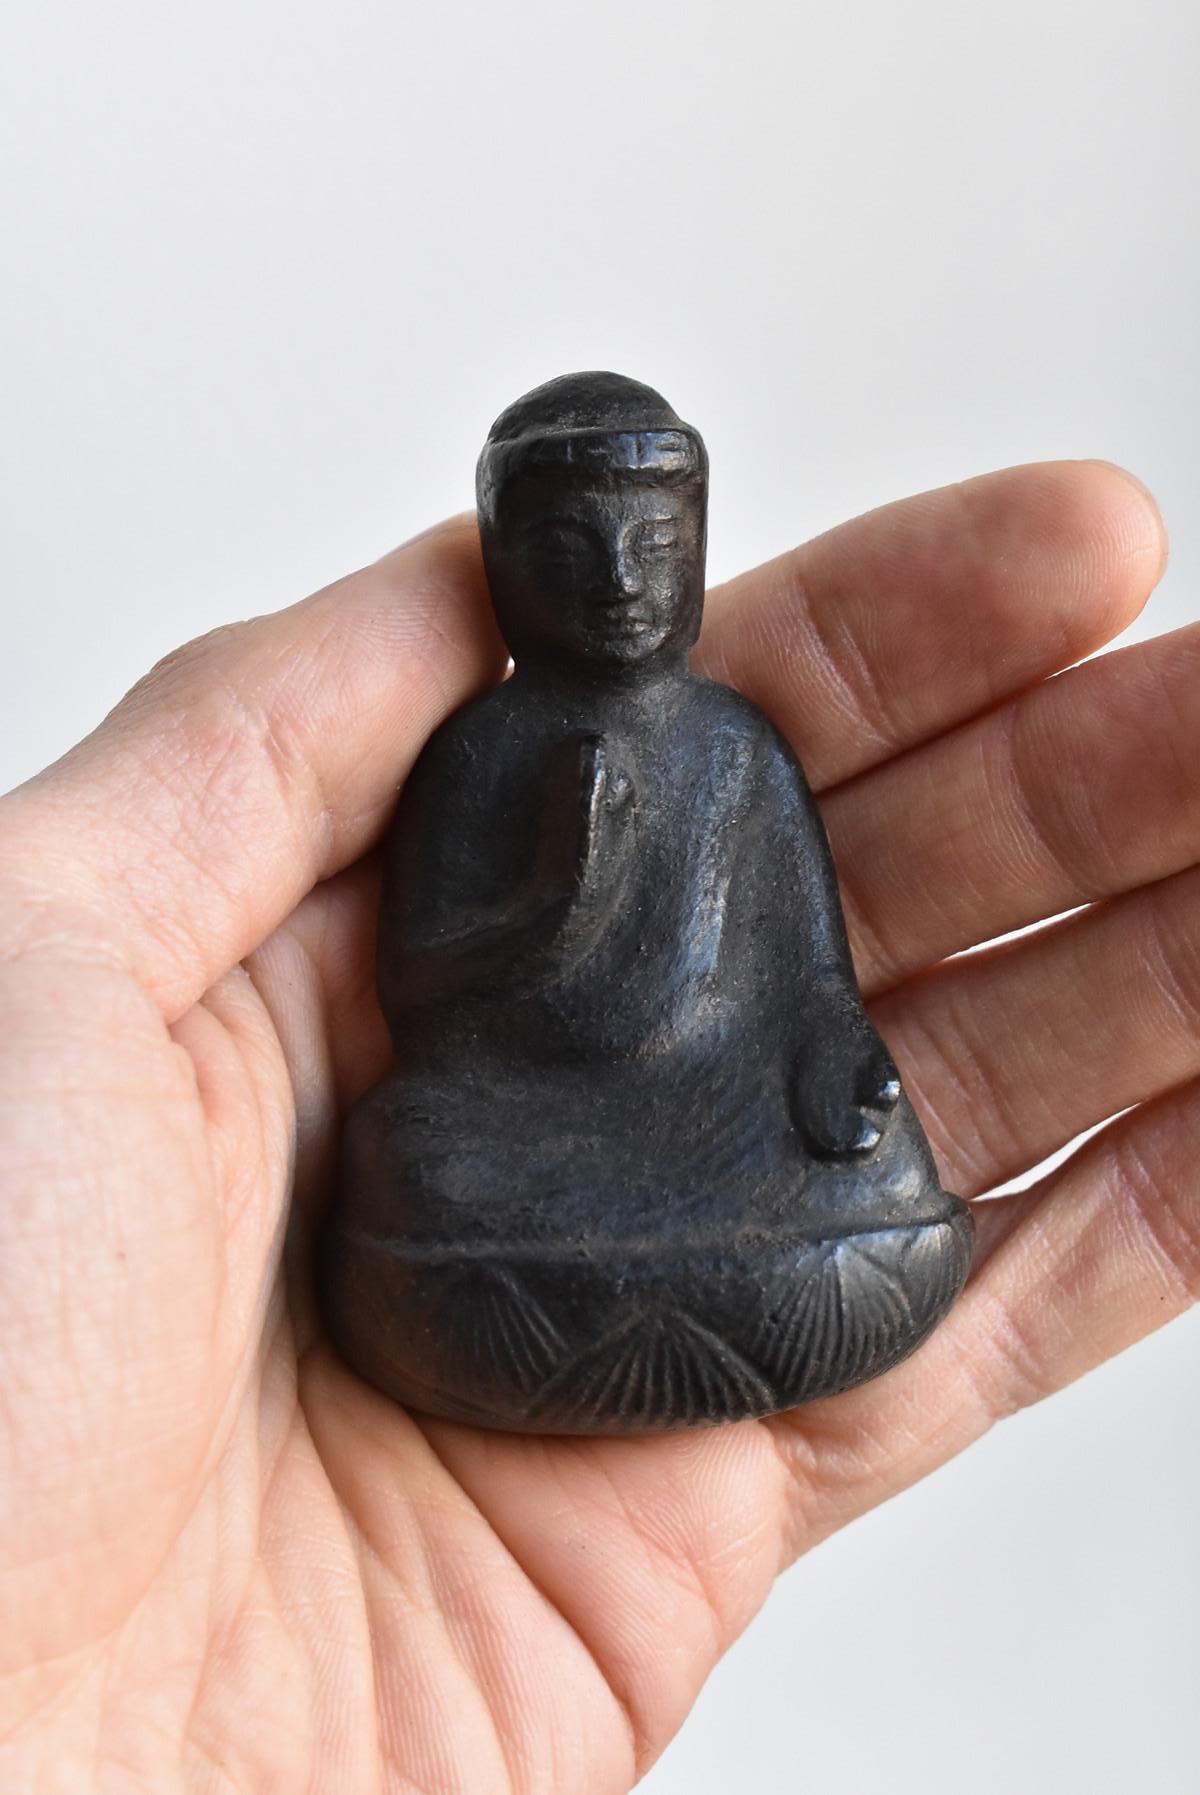 Japanese Antique 14th-16th Century Small Copper Buddha Statue or kakebutu 10